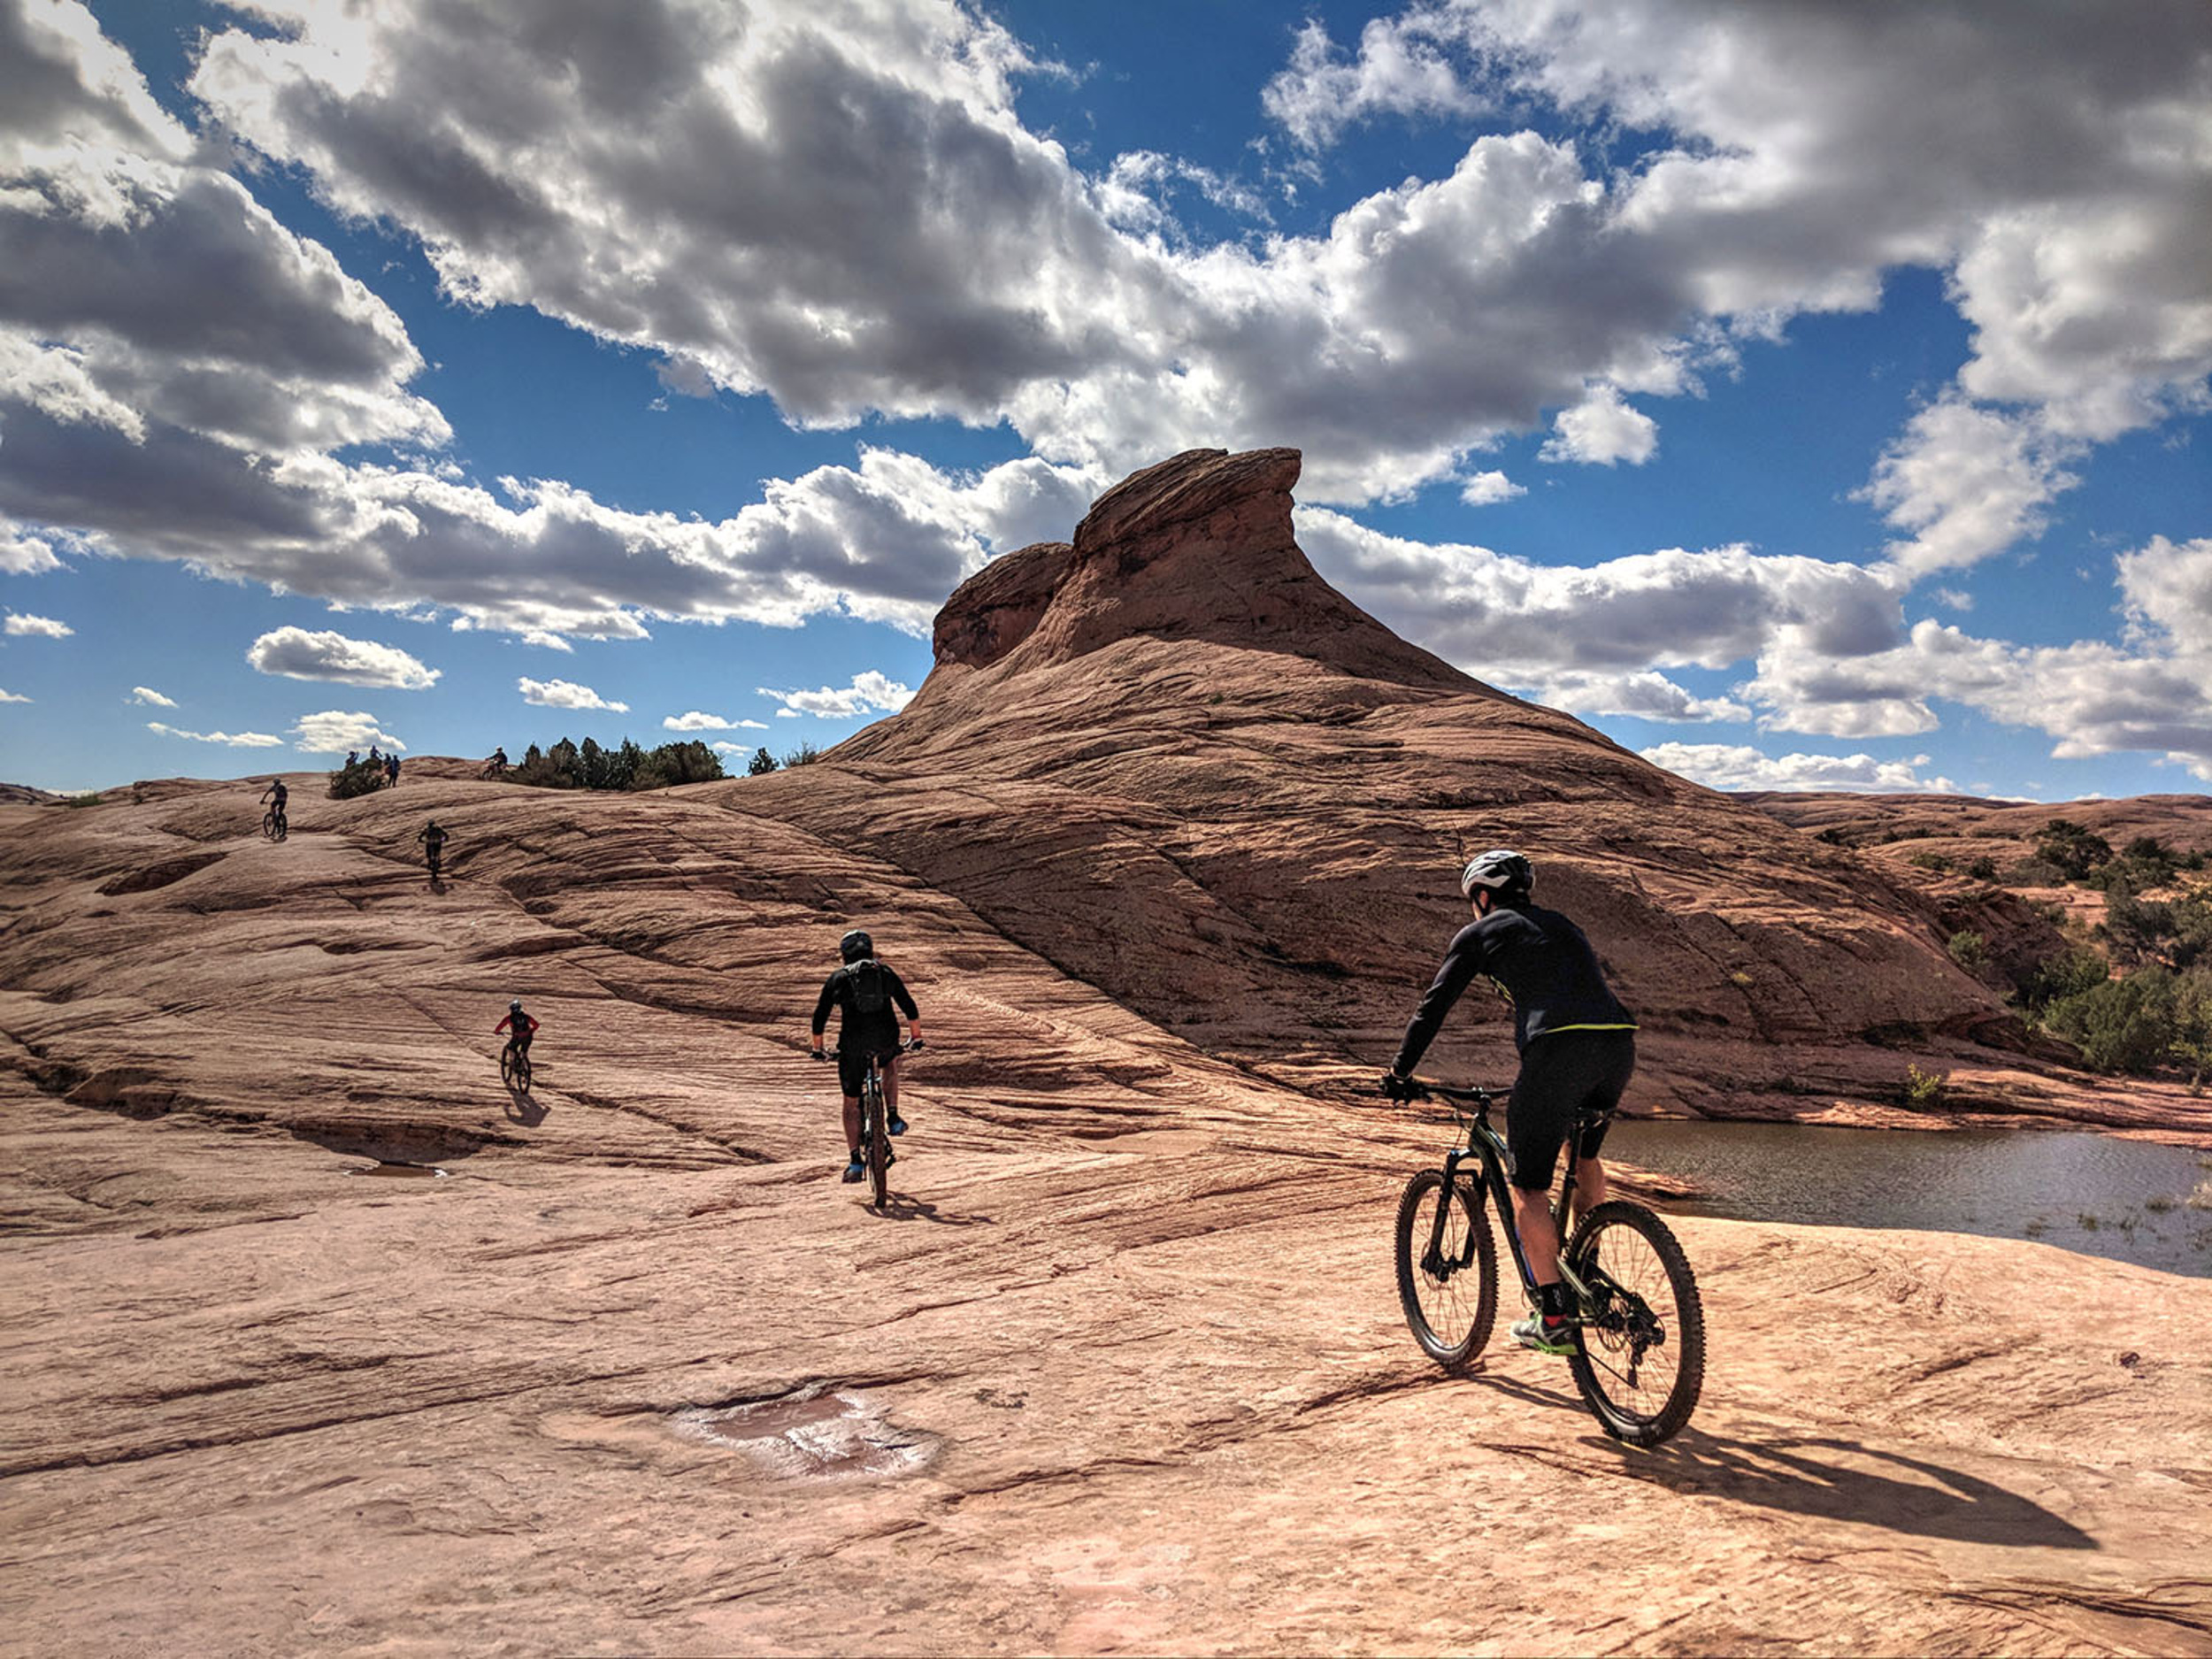 <p>Moab is a world-class destination for mountain biking. If you're a more experienced rider, there's no better place to ride than Slick Rock trail, which is basically a skate park made of rock. </p><p><a href='https://www.msn.com/en-us/community/channel/vid-cj9pqbr0vn9in2b6ddcd8sfgpfq6x6utp44fssrv6mc2gtybw0us'>Follow us on MSN to see more of our exclusive lifestyle content.</a></p>